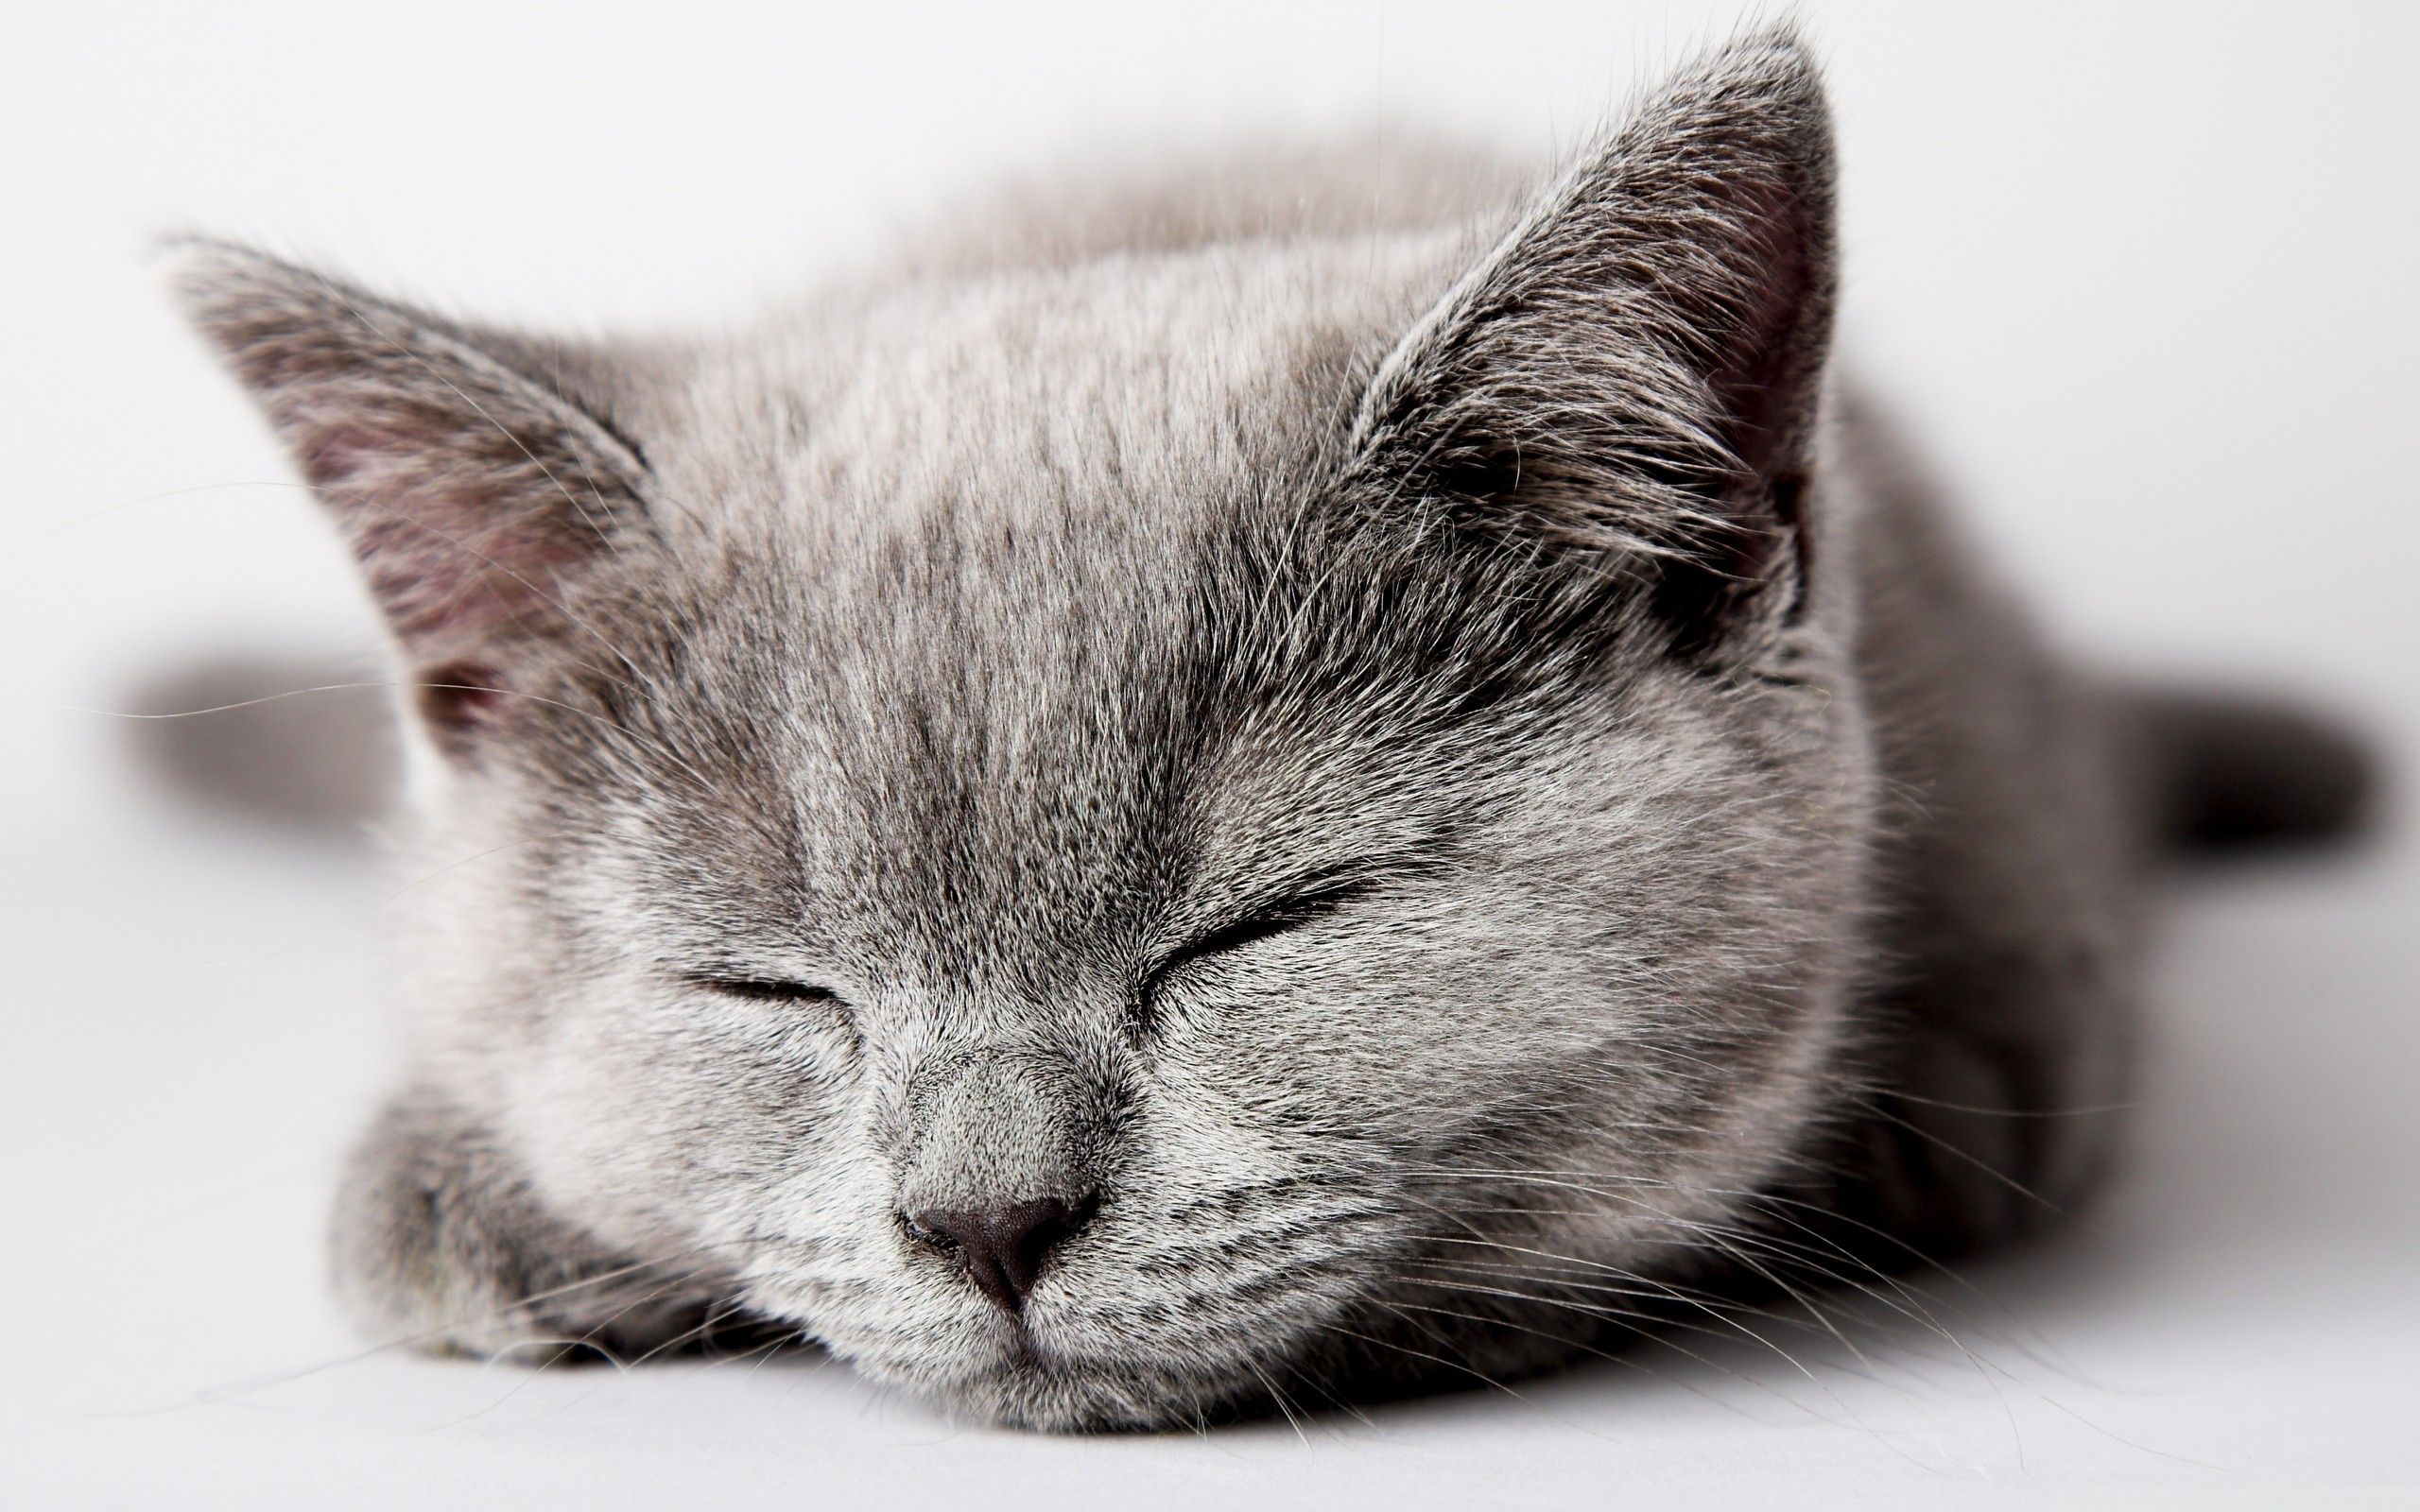 Sleeping gray kitten wallpaper and image, picture, photo